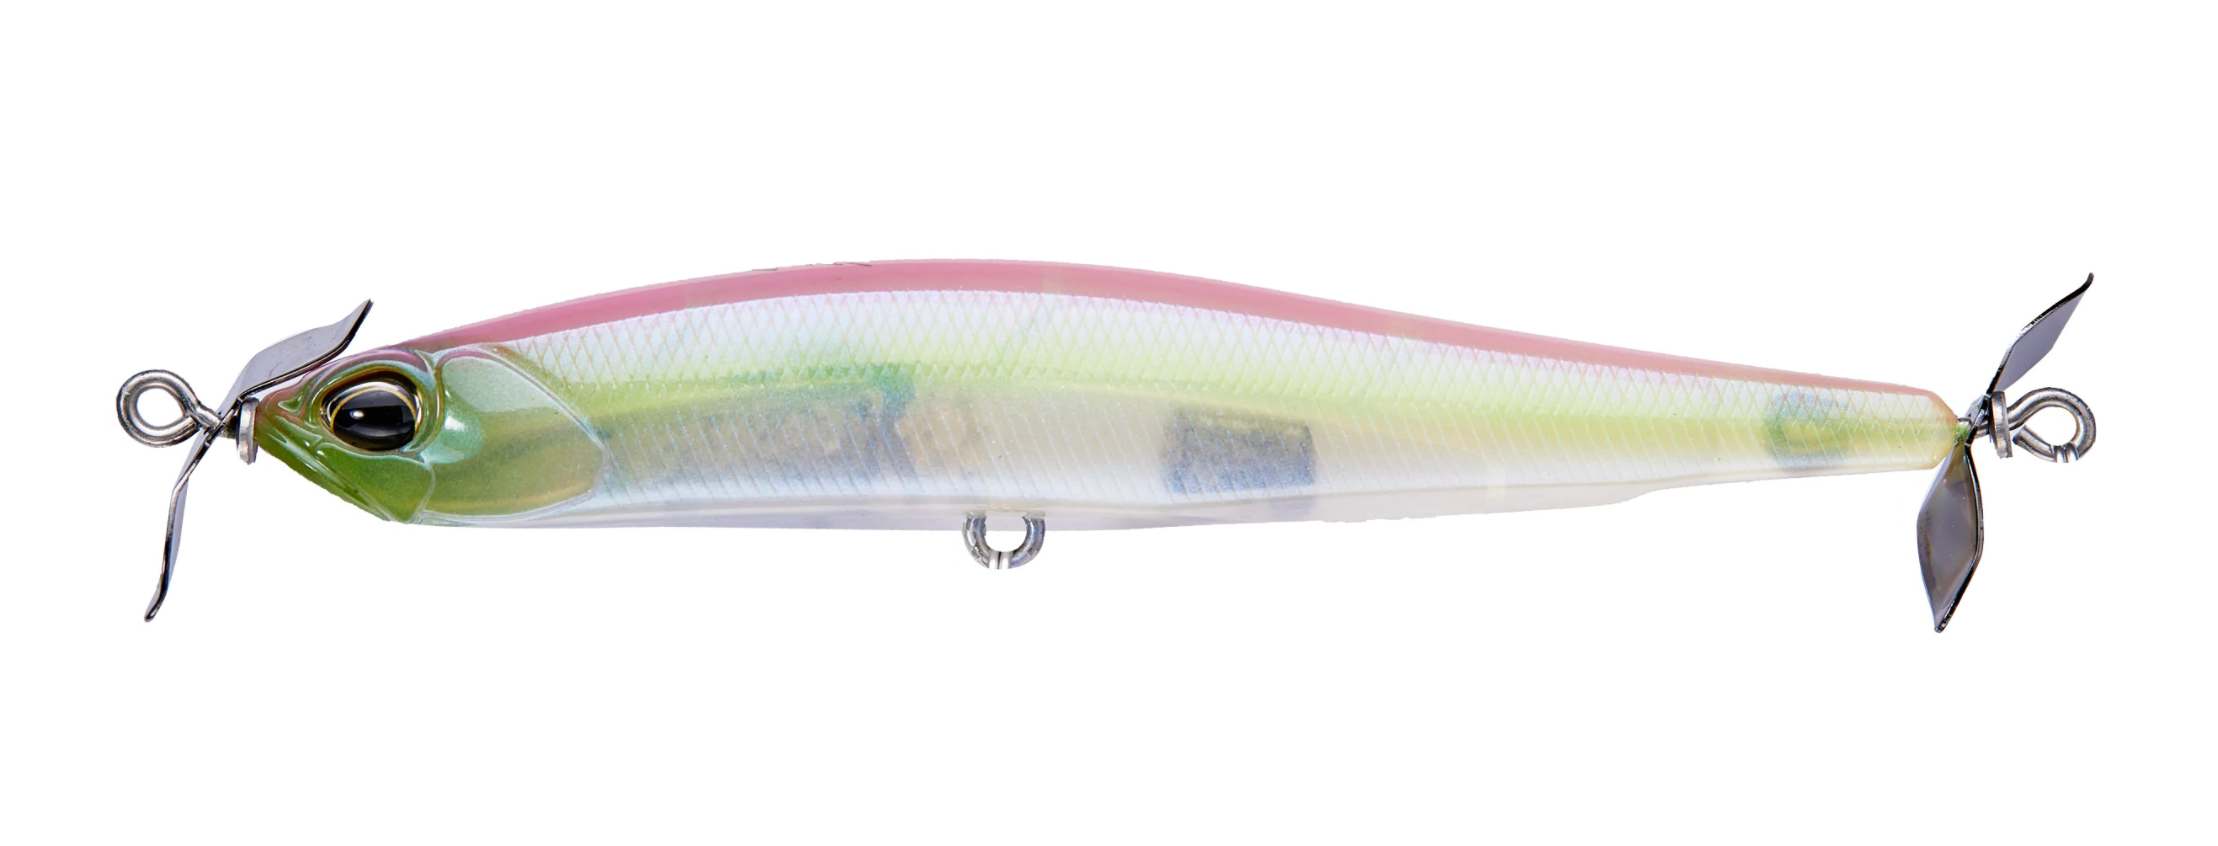 Duo Realis Pencil 110 WT Topwater Fishing Lure Set, Sports Equipment,  Fishing on Carousell